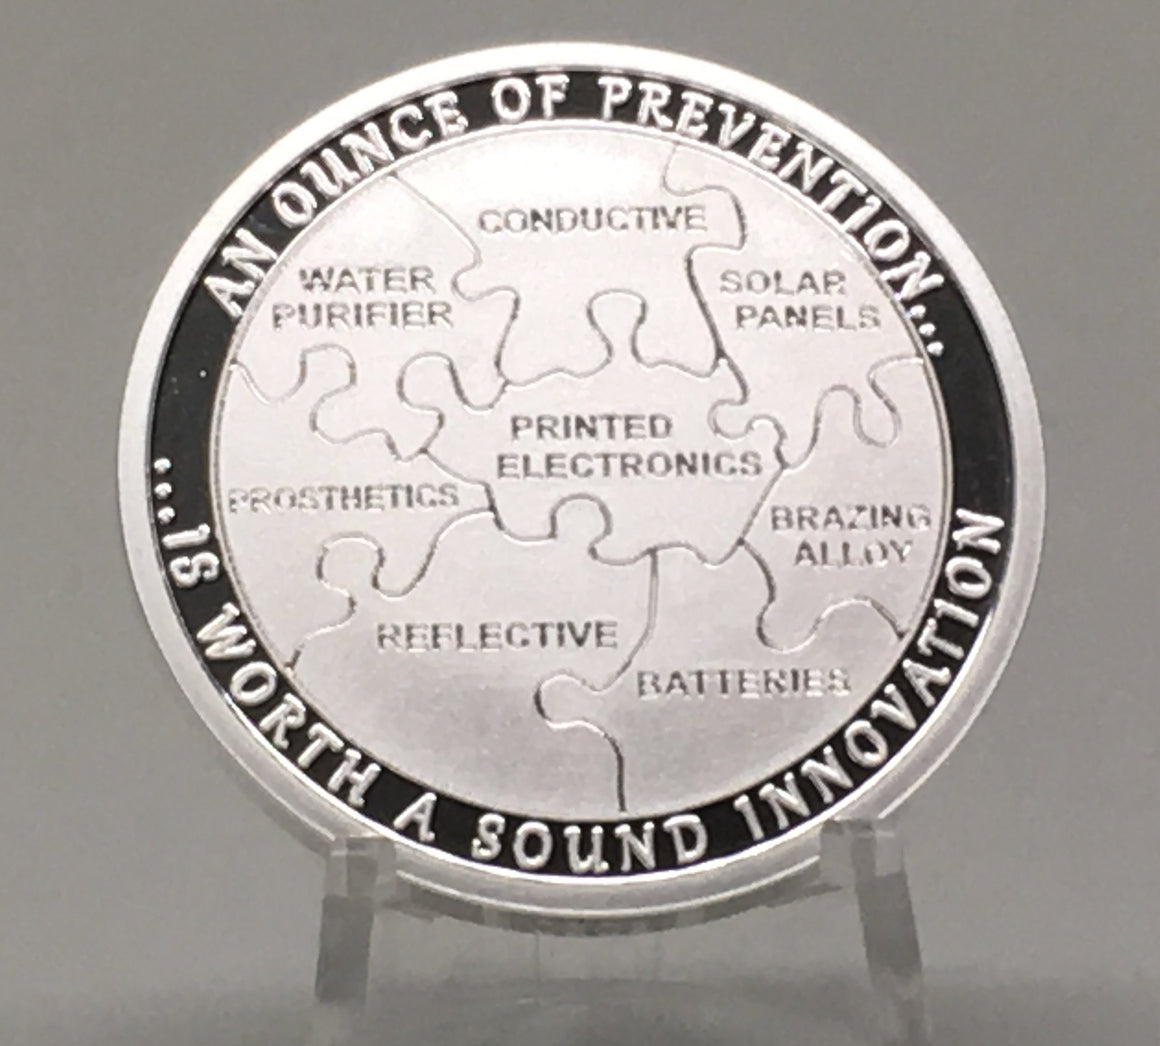 Ounce of Prevention - Innovation by Chautauqua Silver Works, 1oz .999 Fine Silver Round